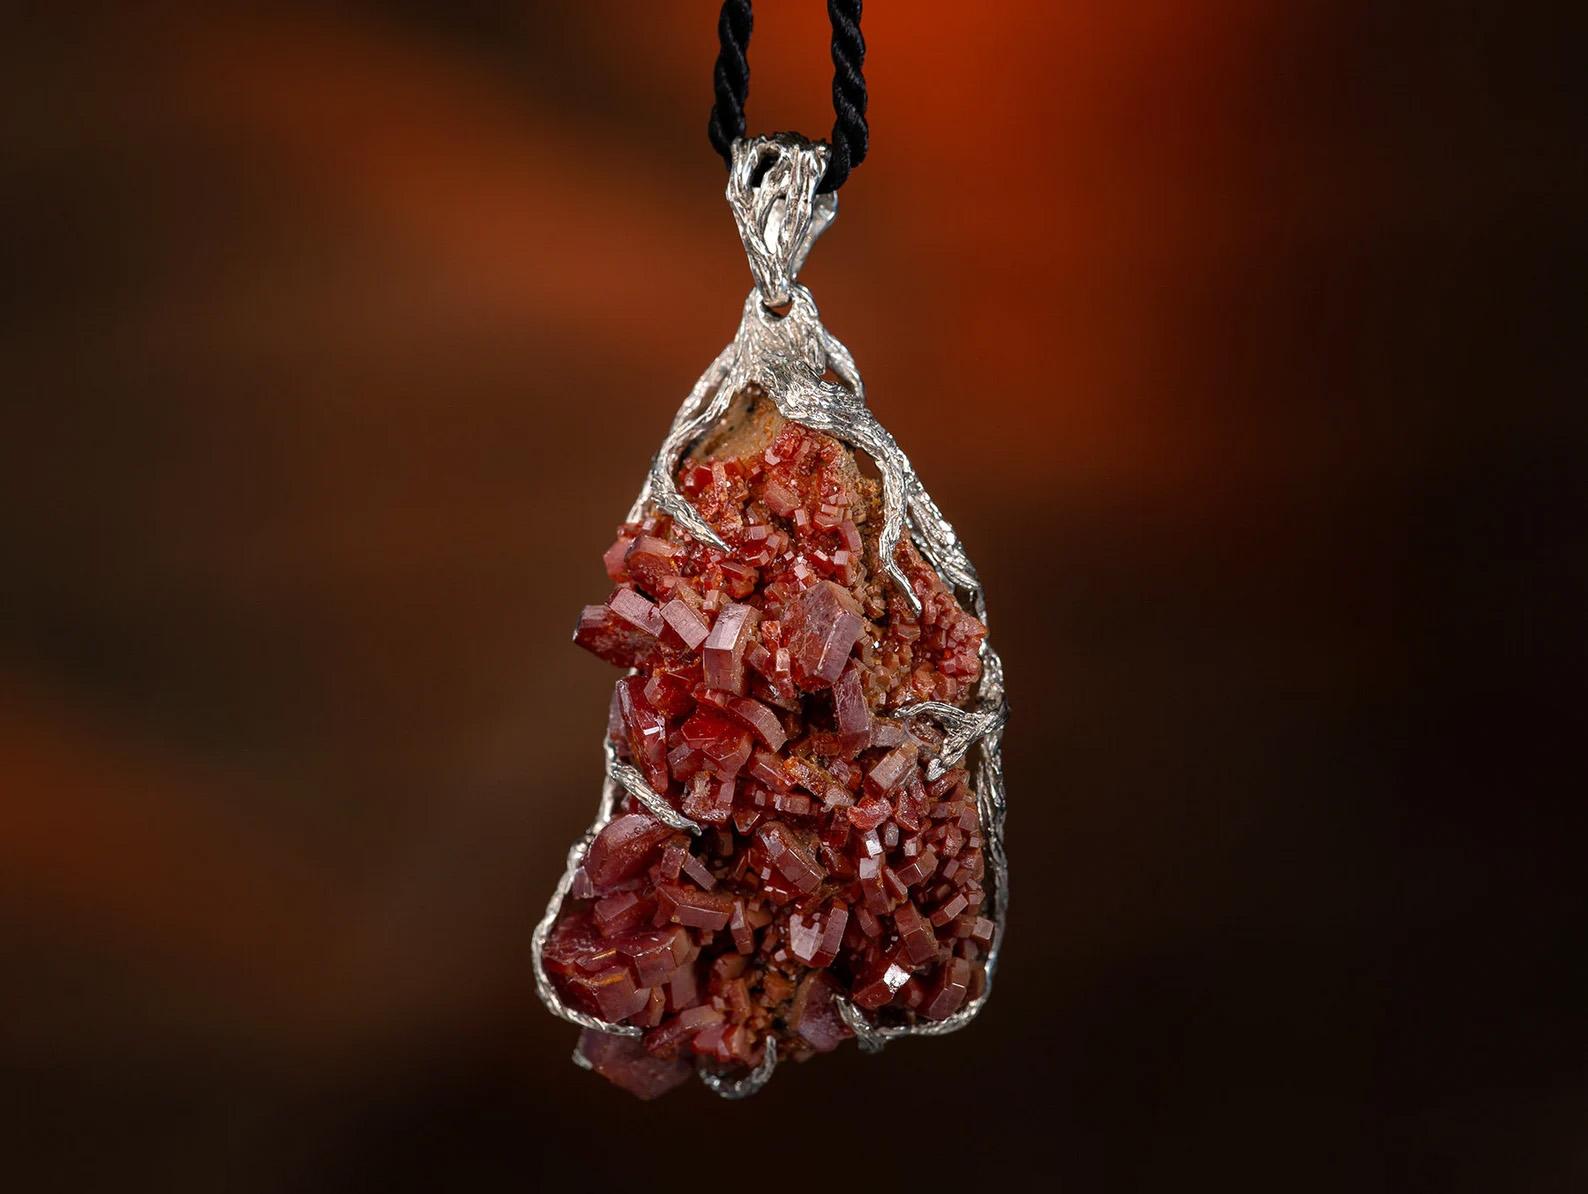 Silver pendant with natural Vanadinite 
gemstone origin - Morocco
gem size is 0.59 х 0.98 х 1.57 in / 15 х 25 х 40 mm
stone weight - 125.50 carats
pendant weight - 29.4 grams
pendant lenght  - 2.09 in / 53 mm